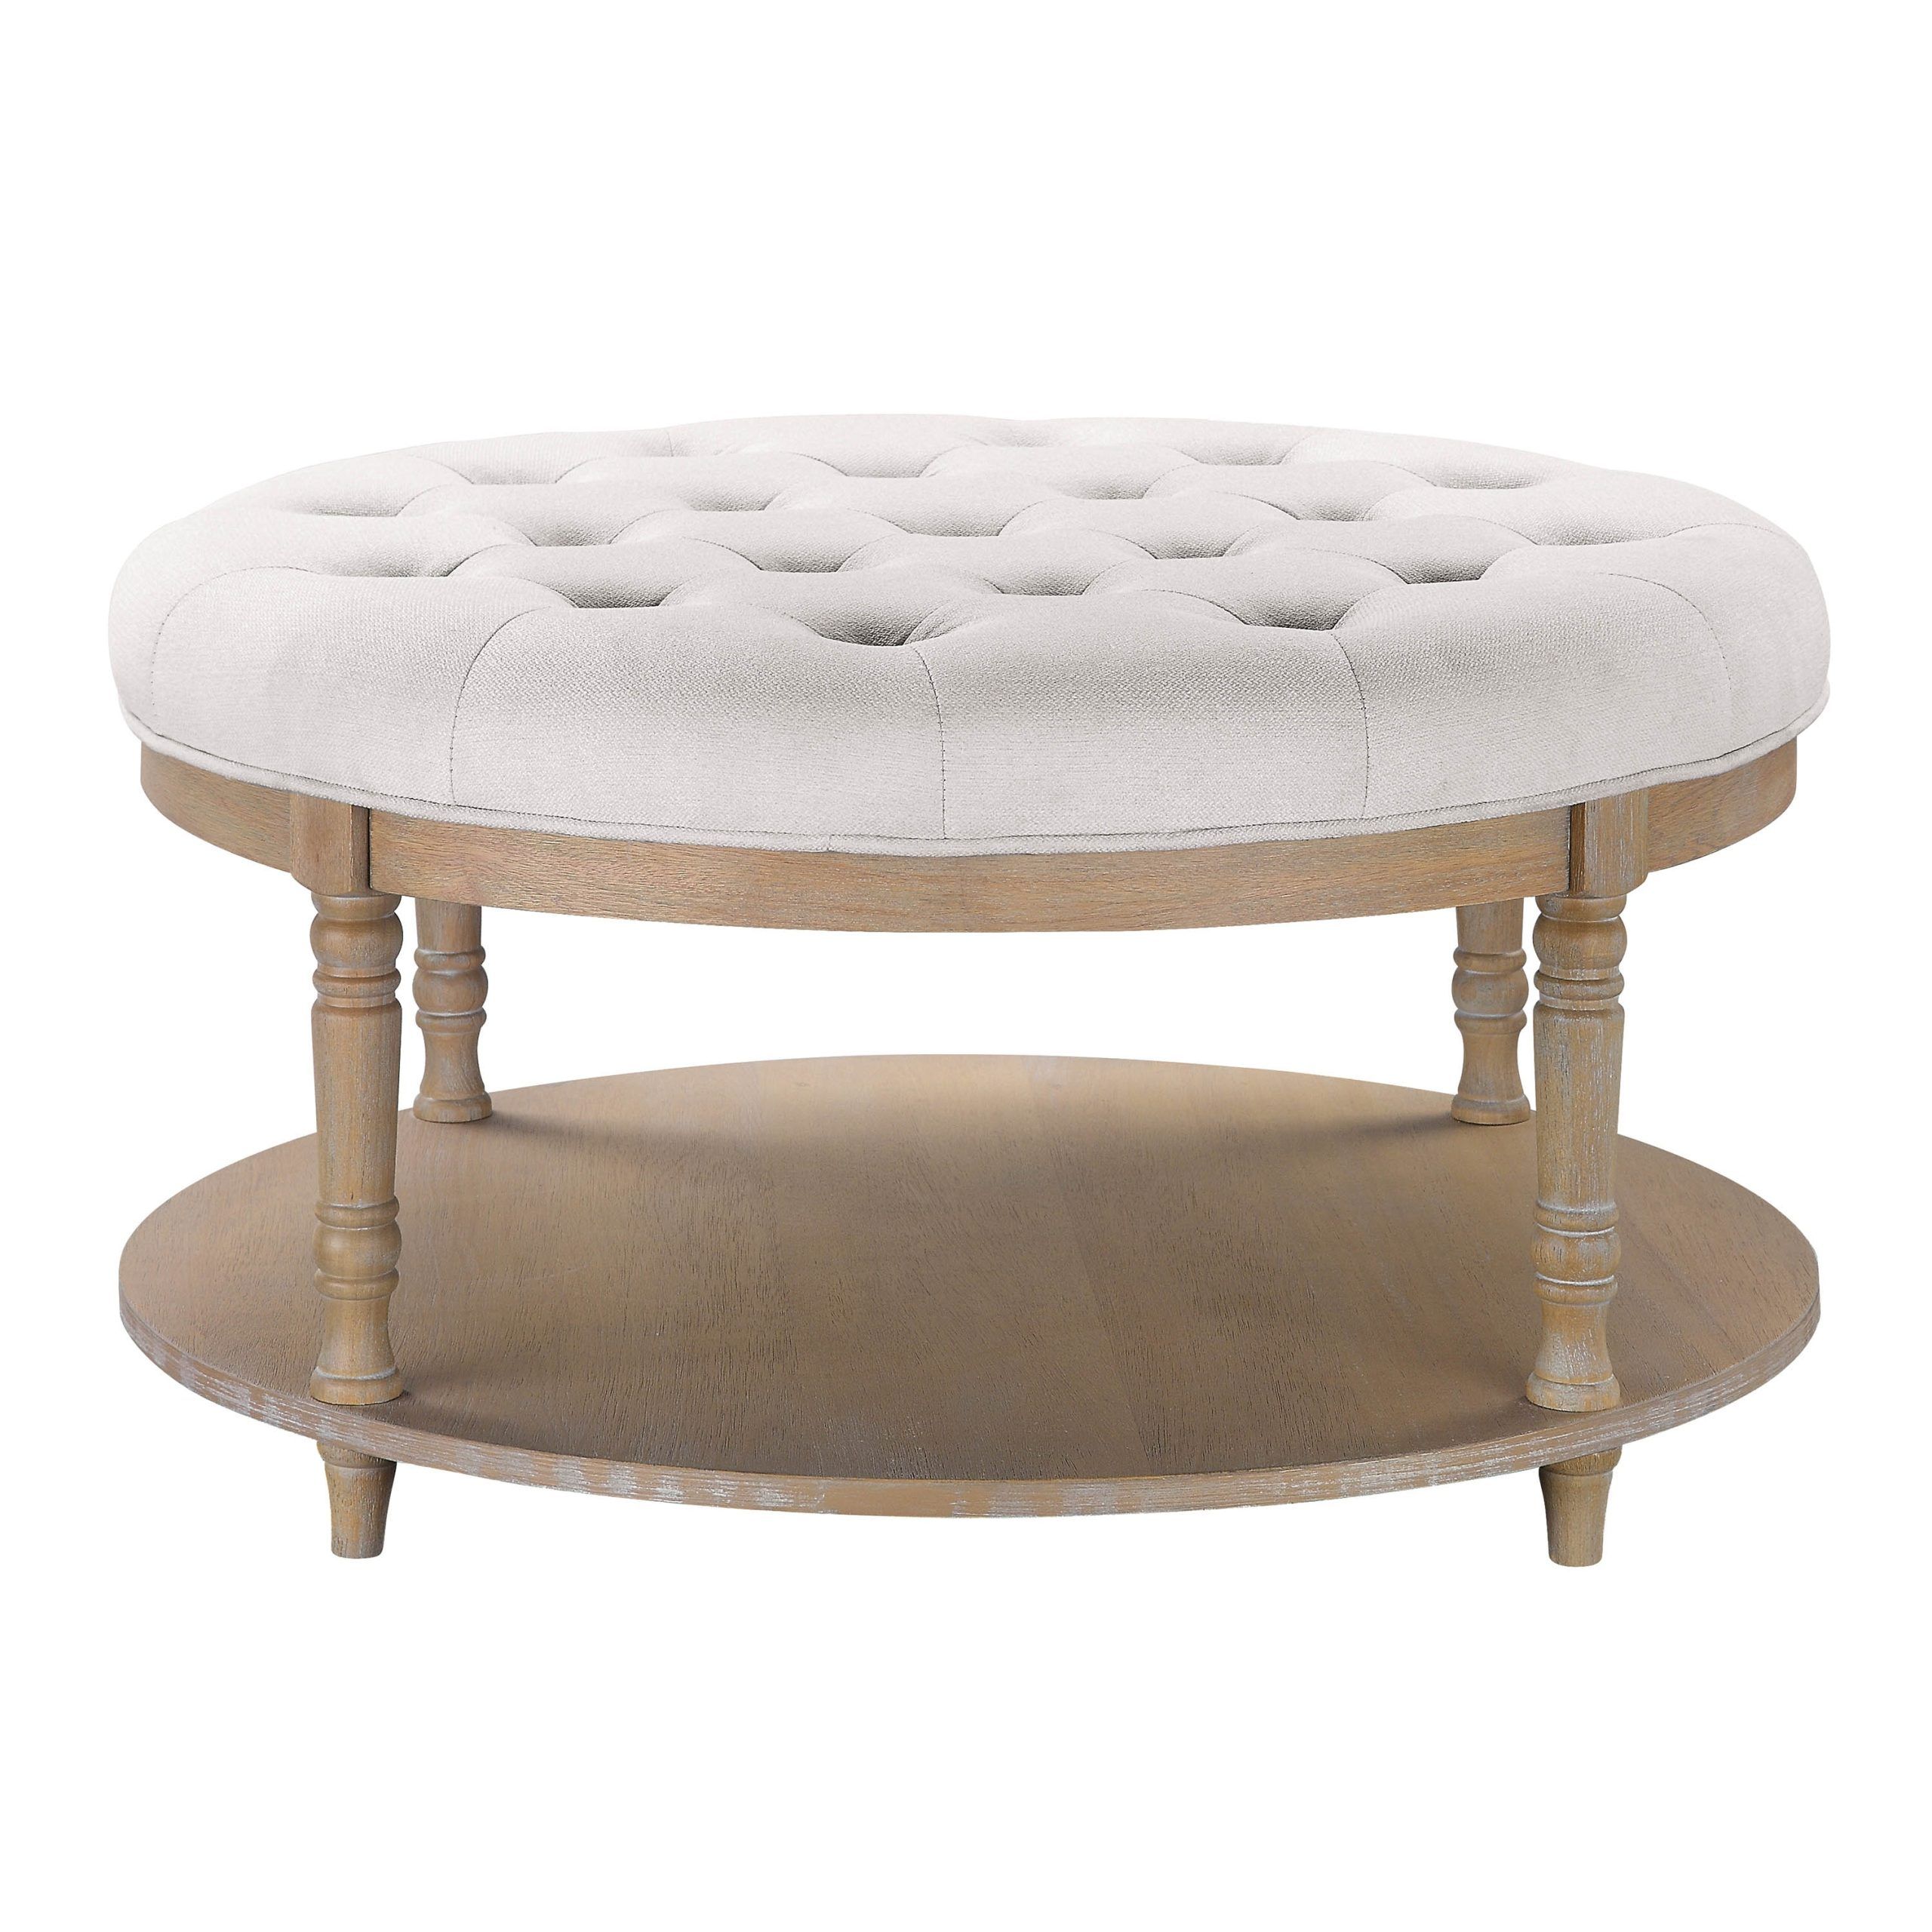 Most Popular 36 Inch Round Ottomans Within Corvus Savannah 36 Inch Round Storage Tufted Chesterfield Cocktail Ottoman  – Overstock –  (View 6 of 10)